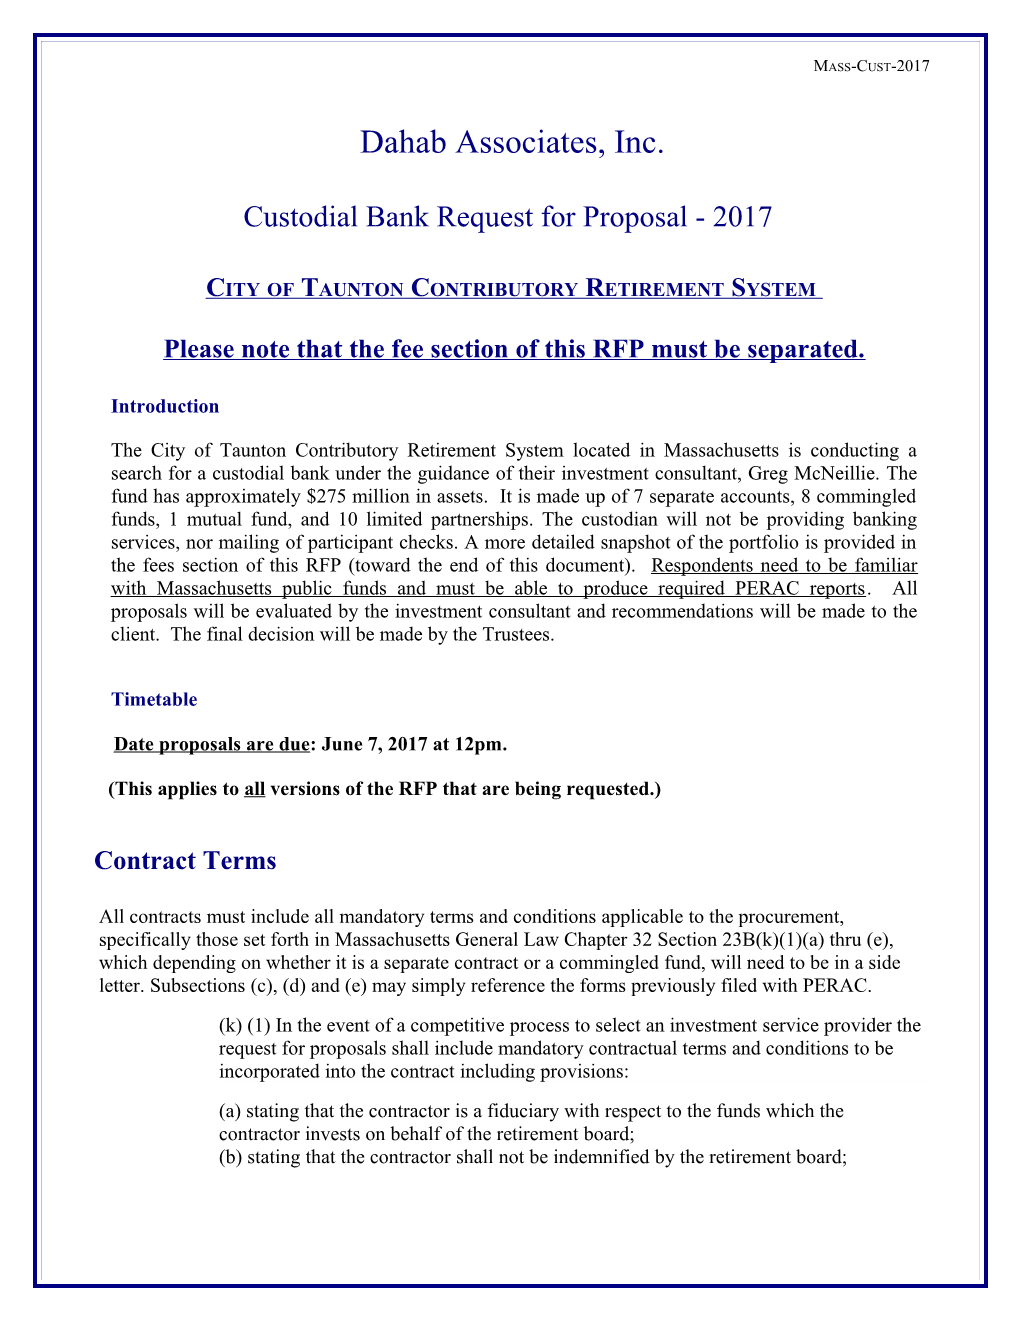 Custodial Bank Request for Proposal - 2017